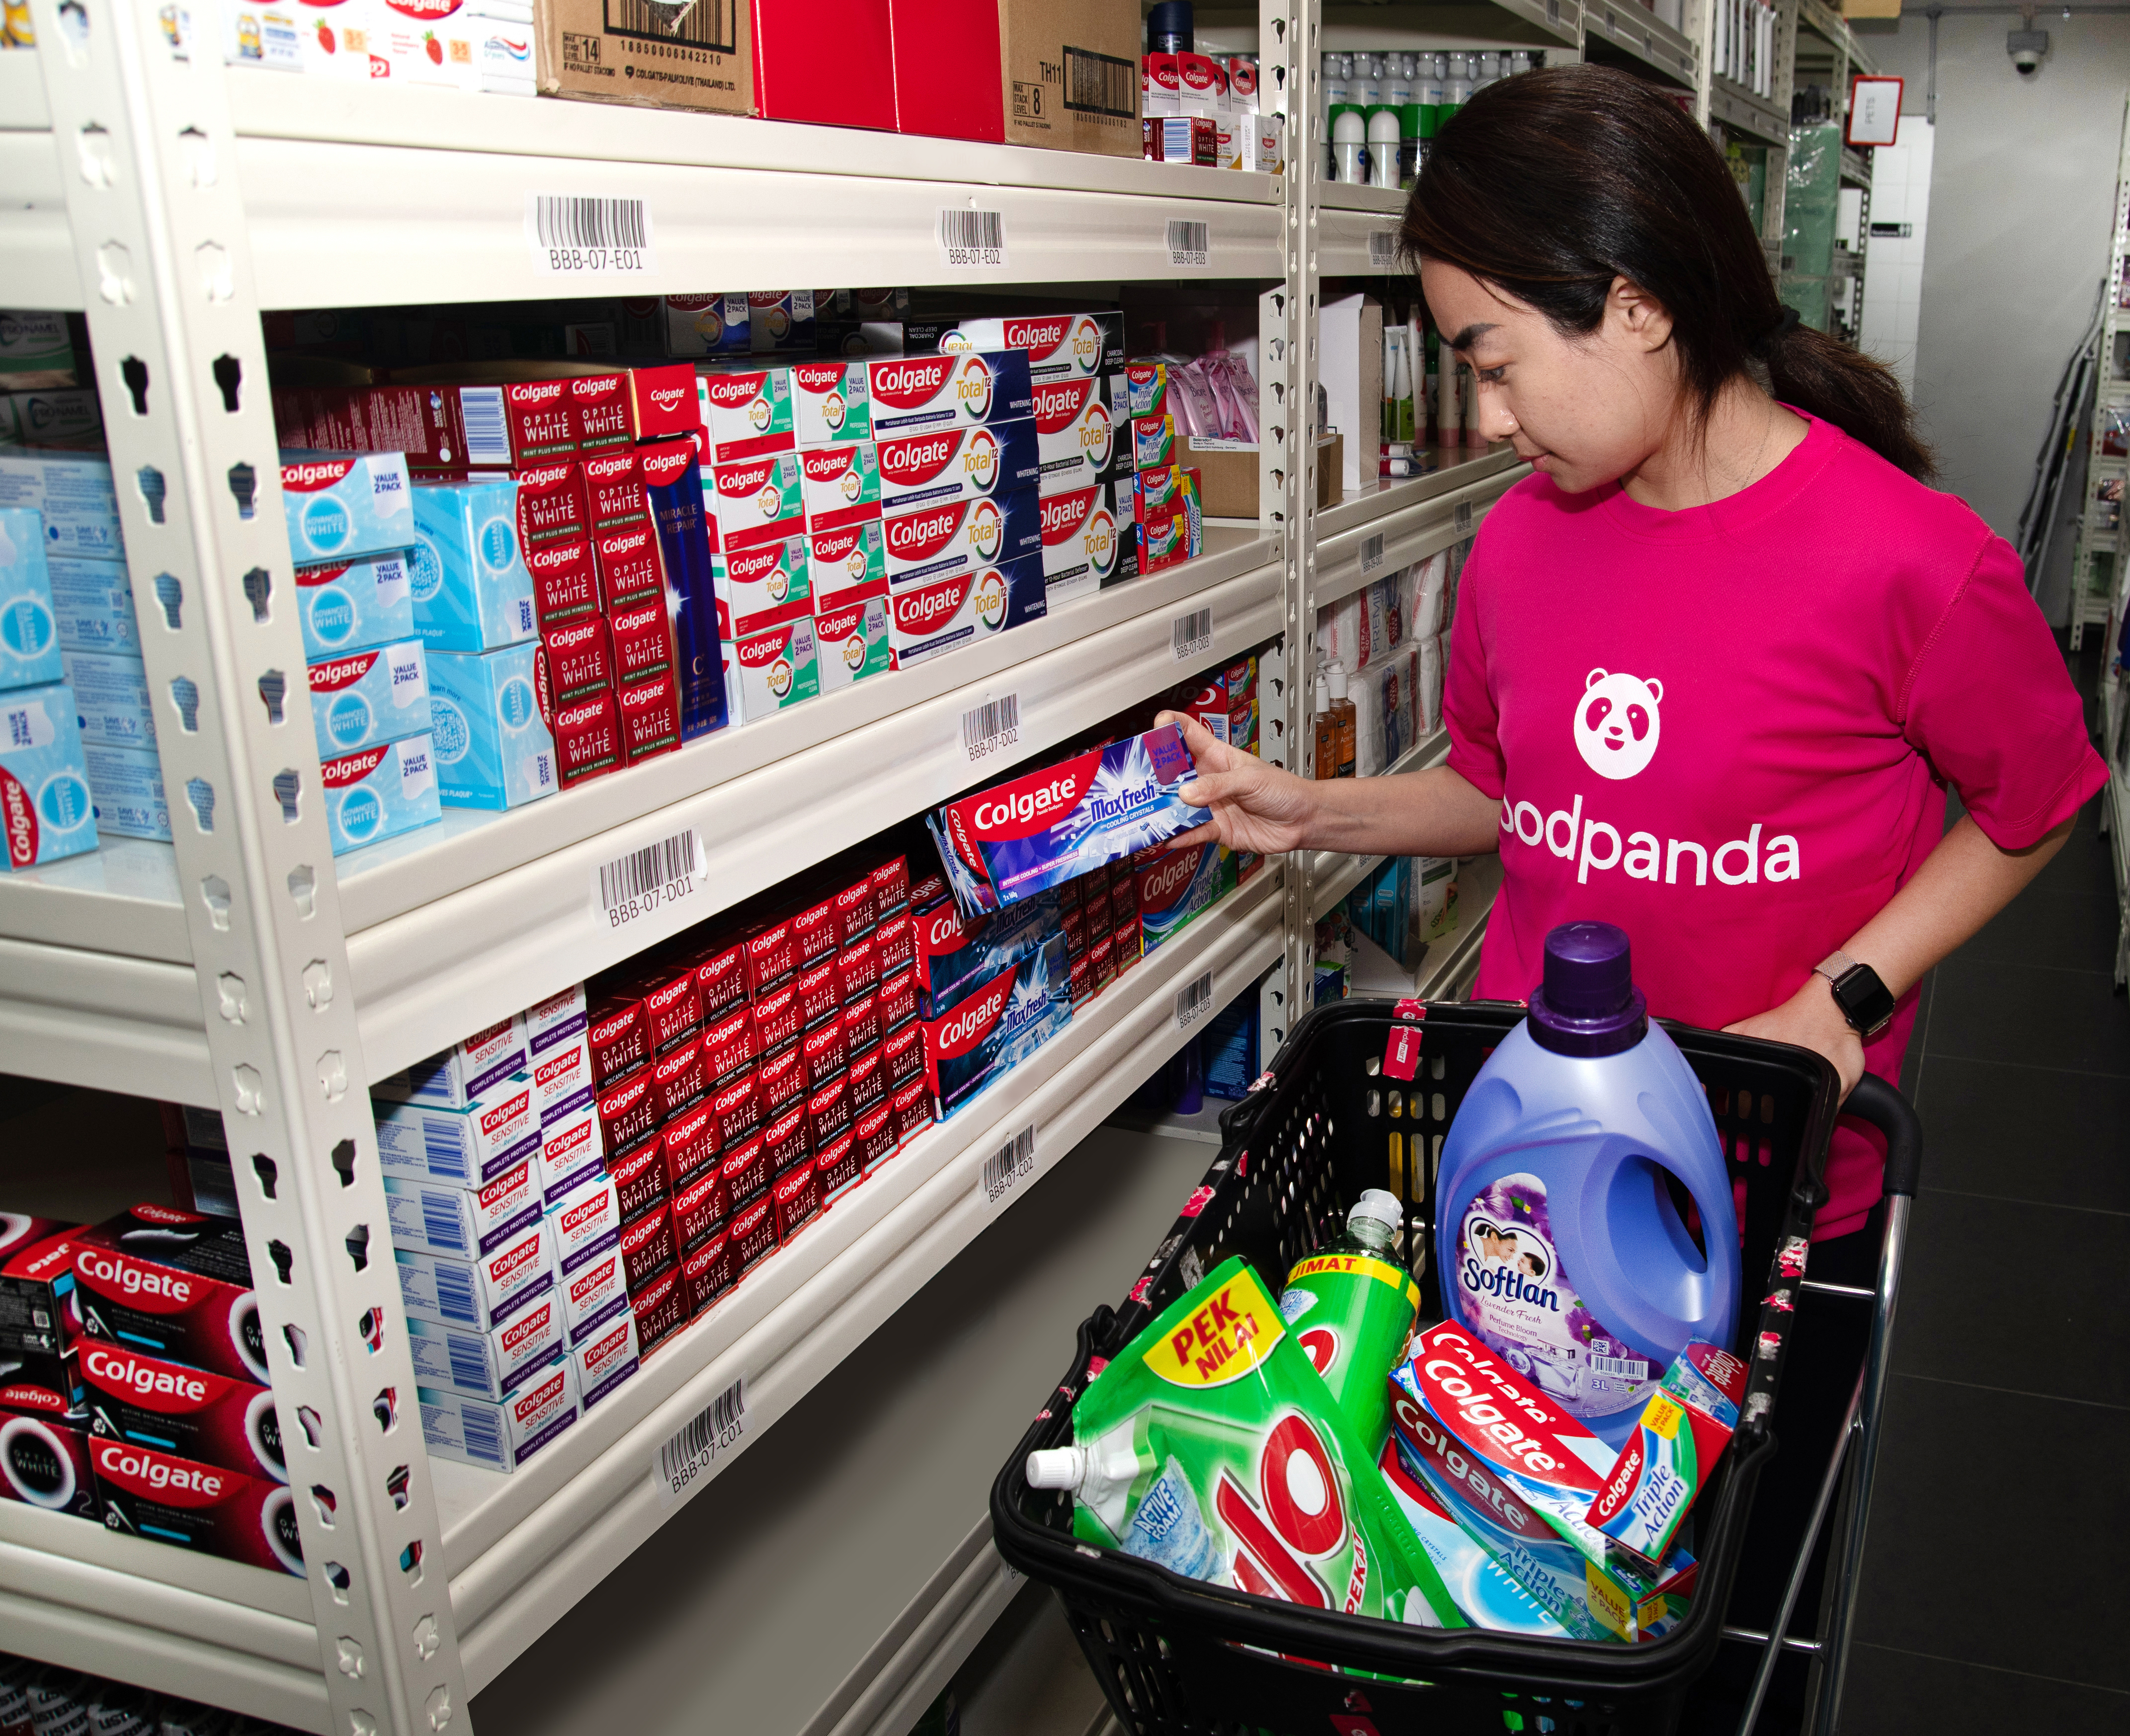 foodpanda staff at pandamart selecting items ordered by customers for delivery. Image attributable to foodpanda